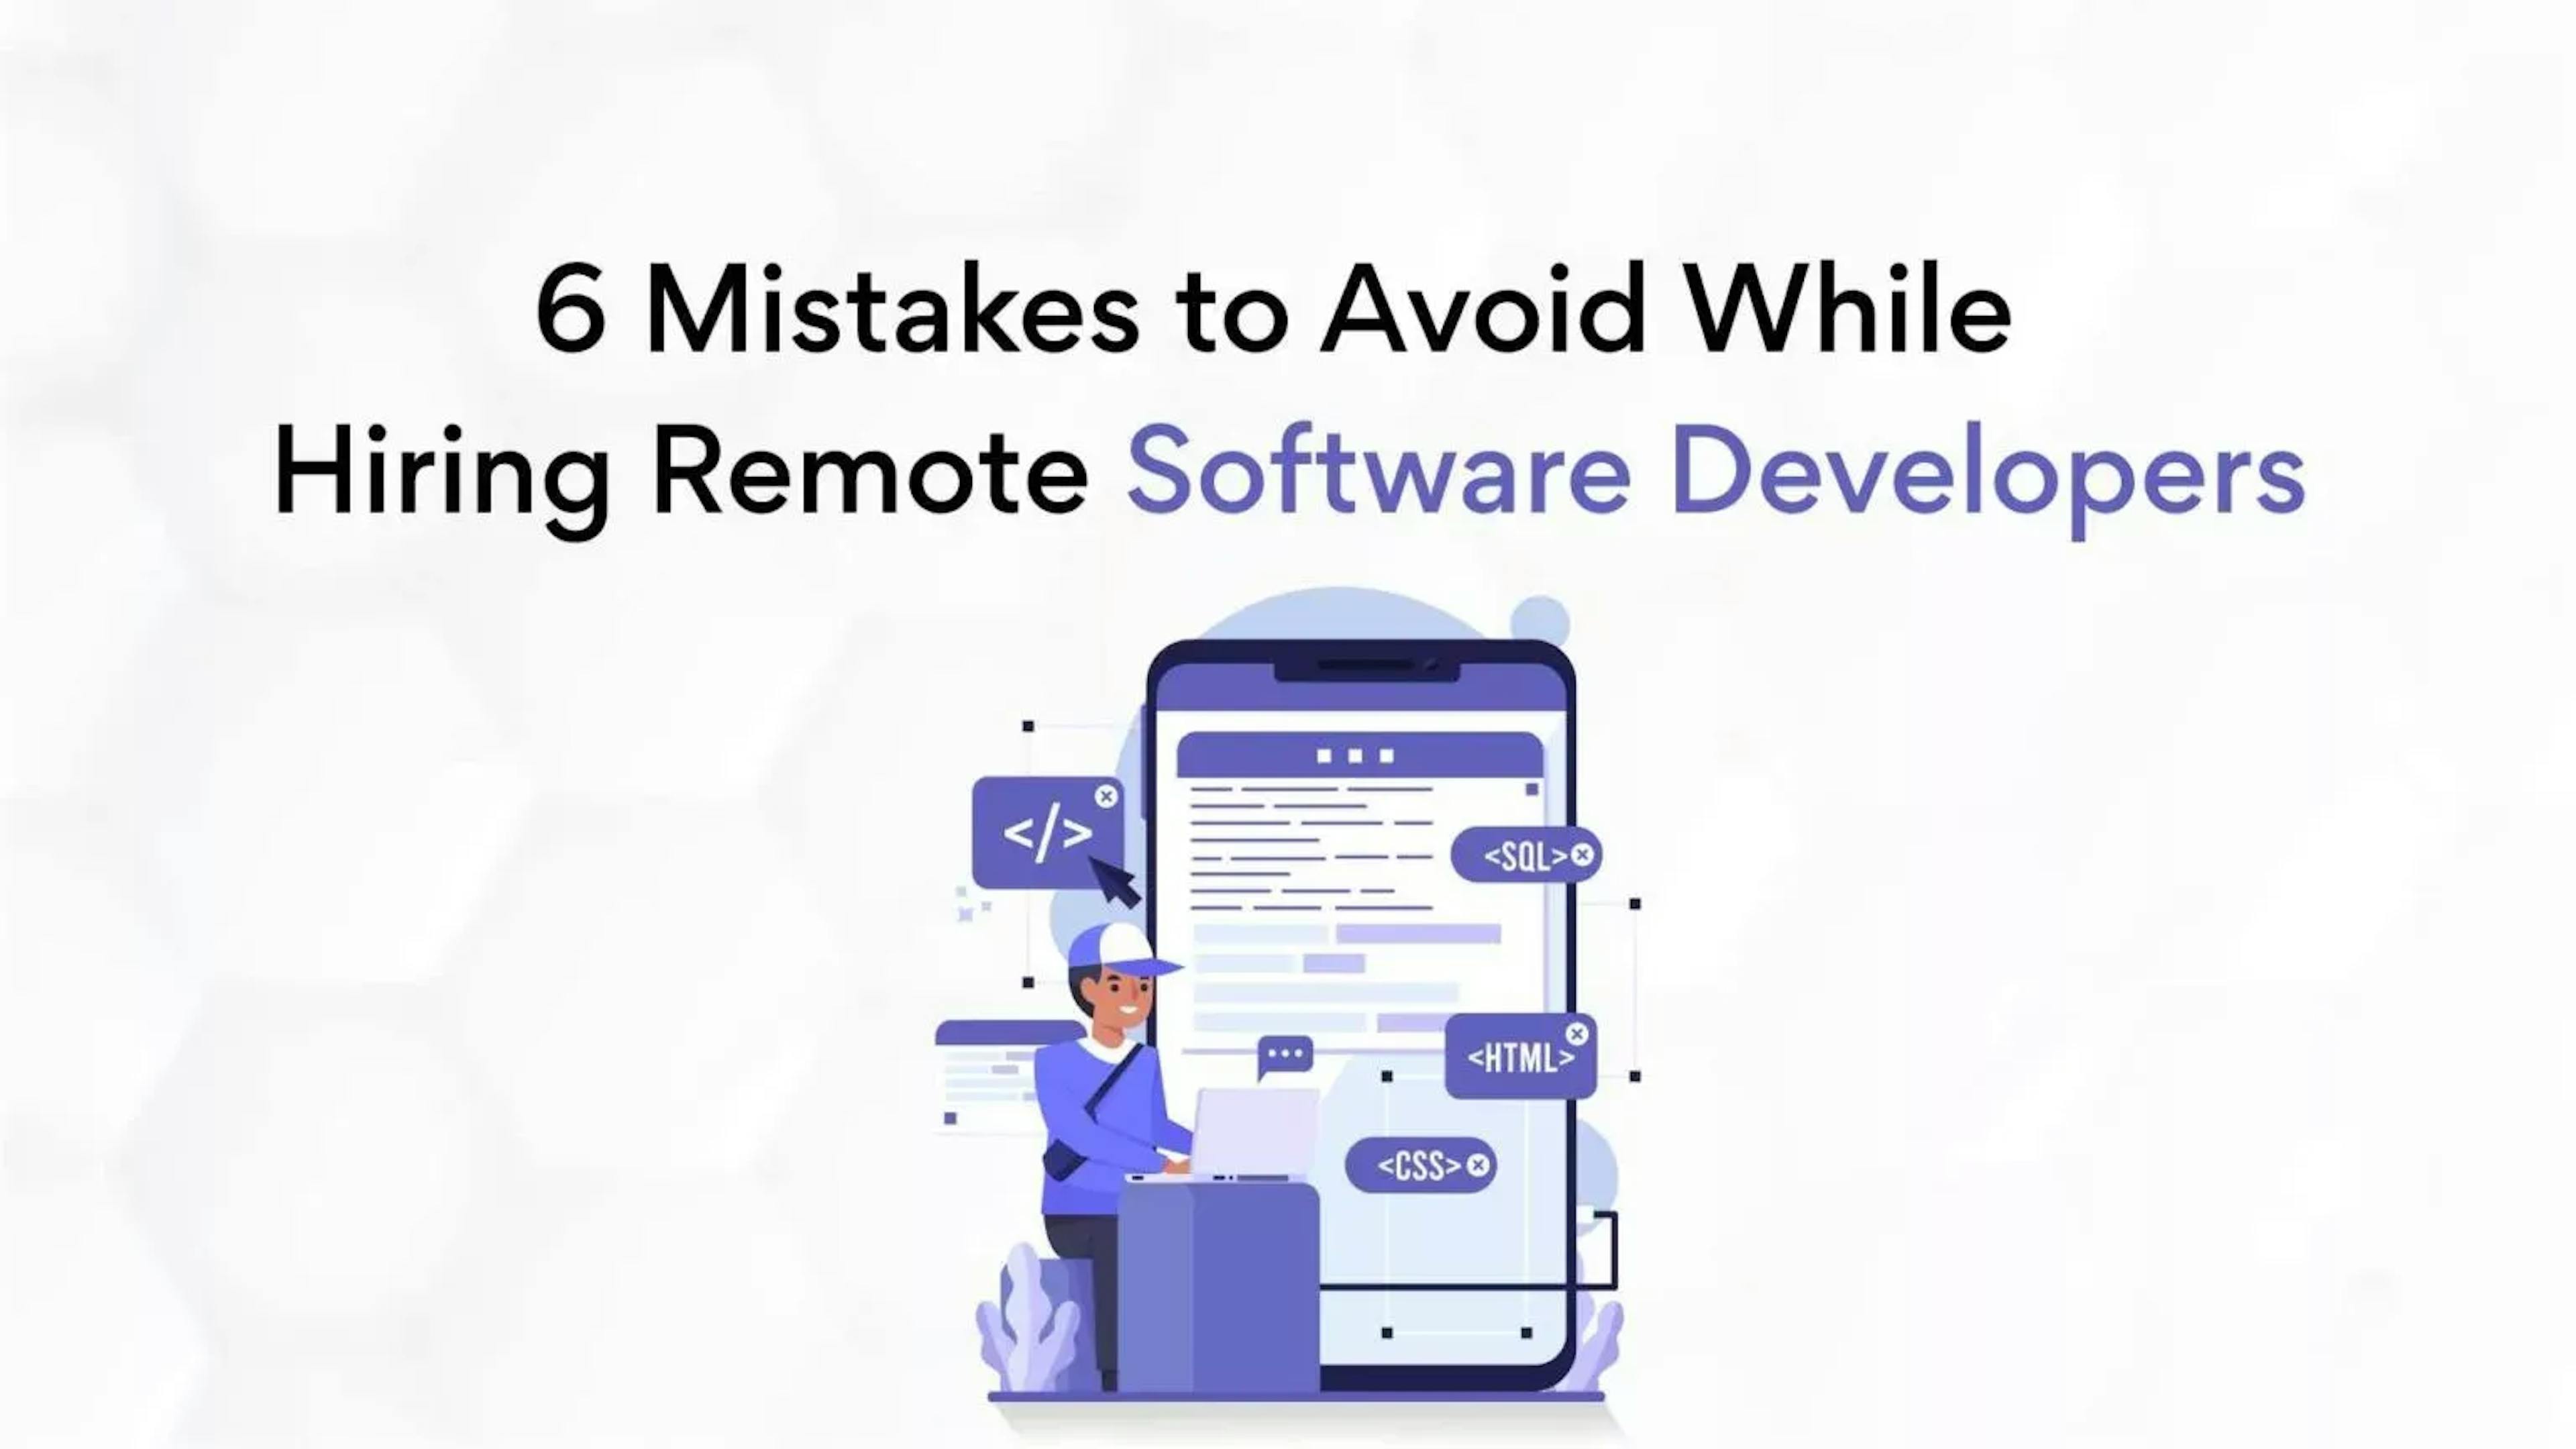 Mistakes to Avoid While Hiring Remote Software Developers